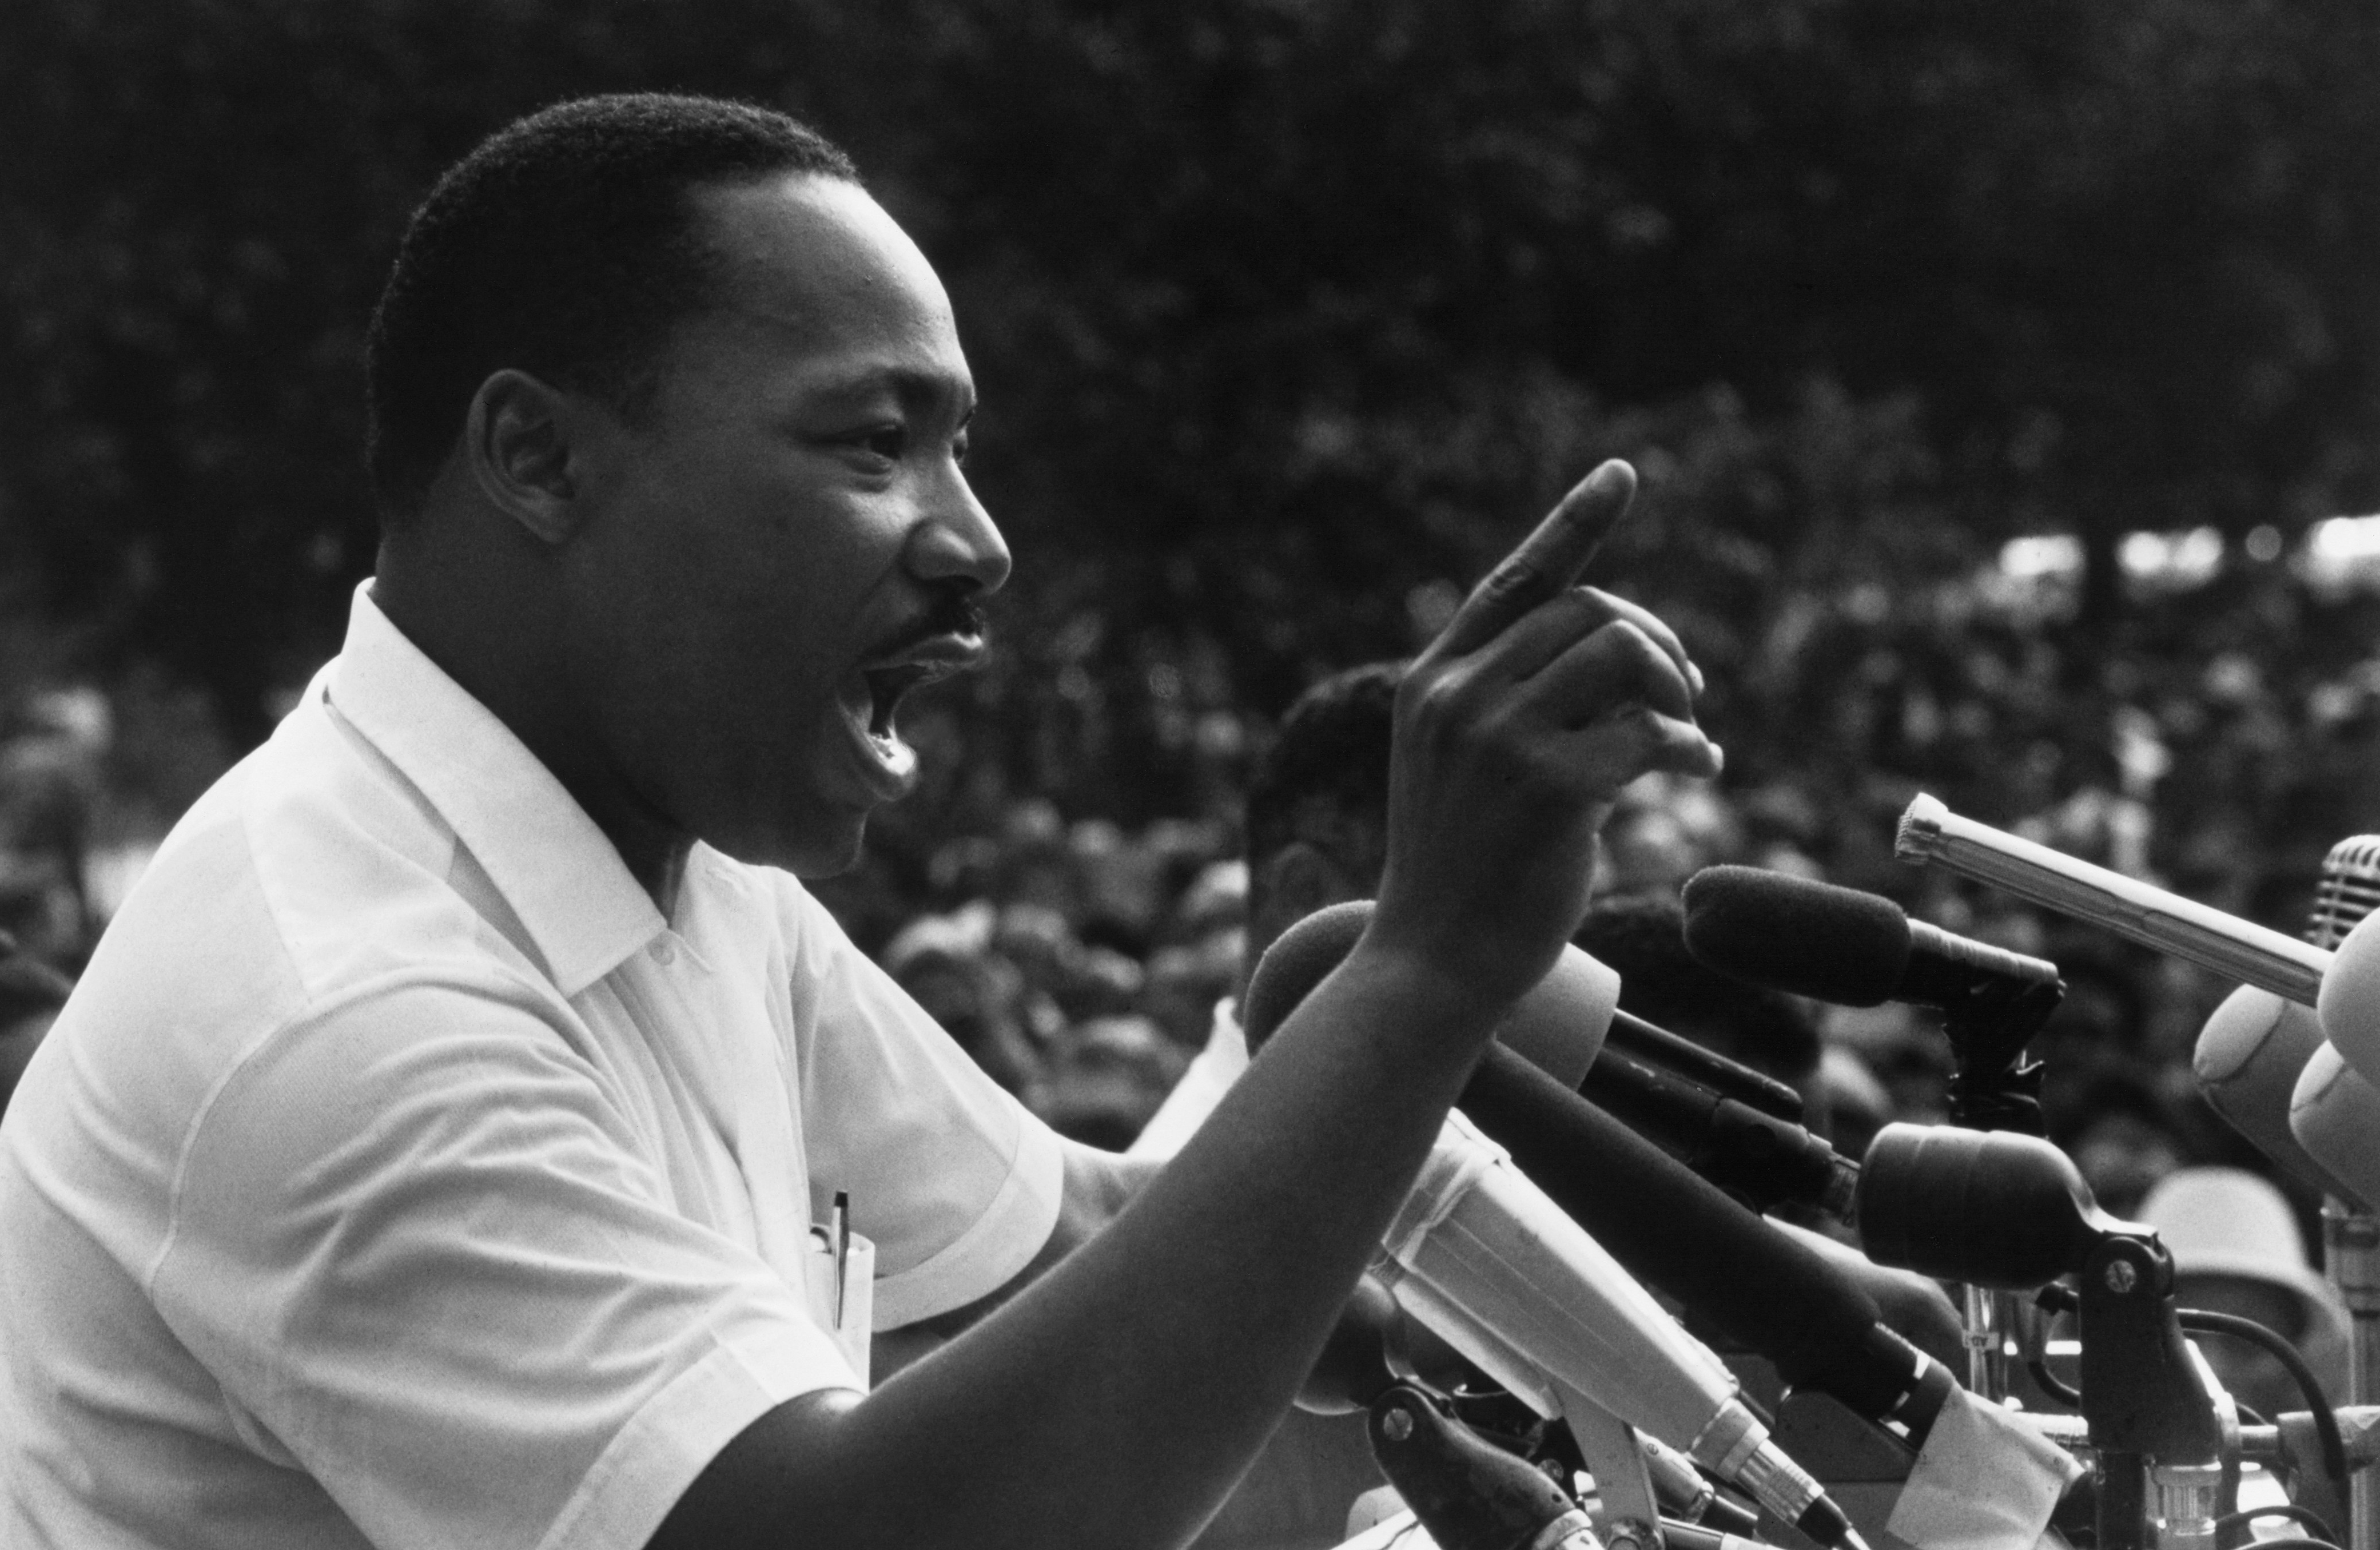 Martin luther king jr essay contest 2014